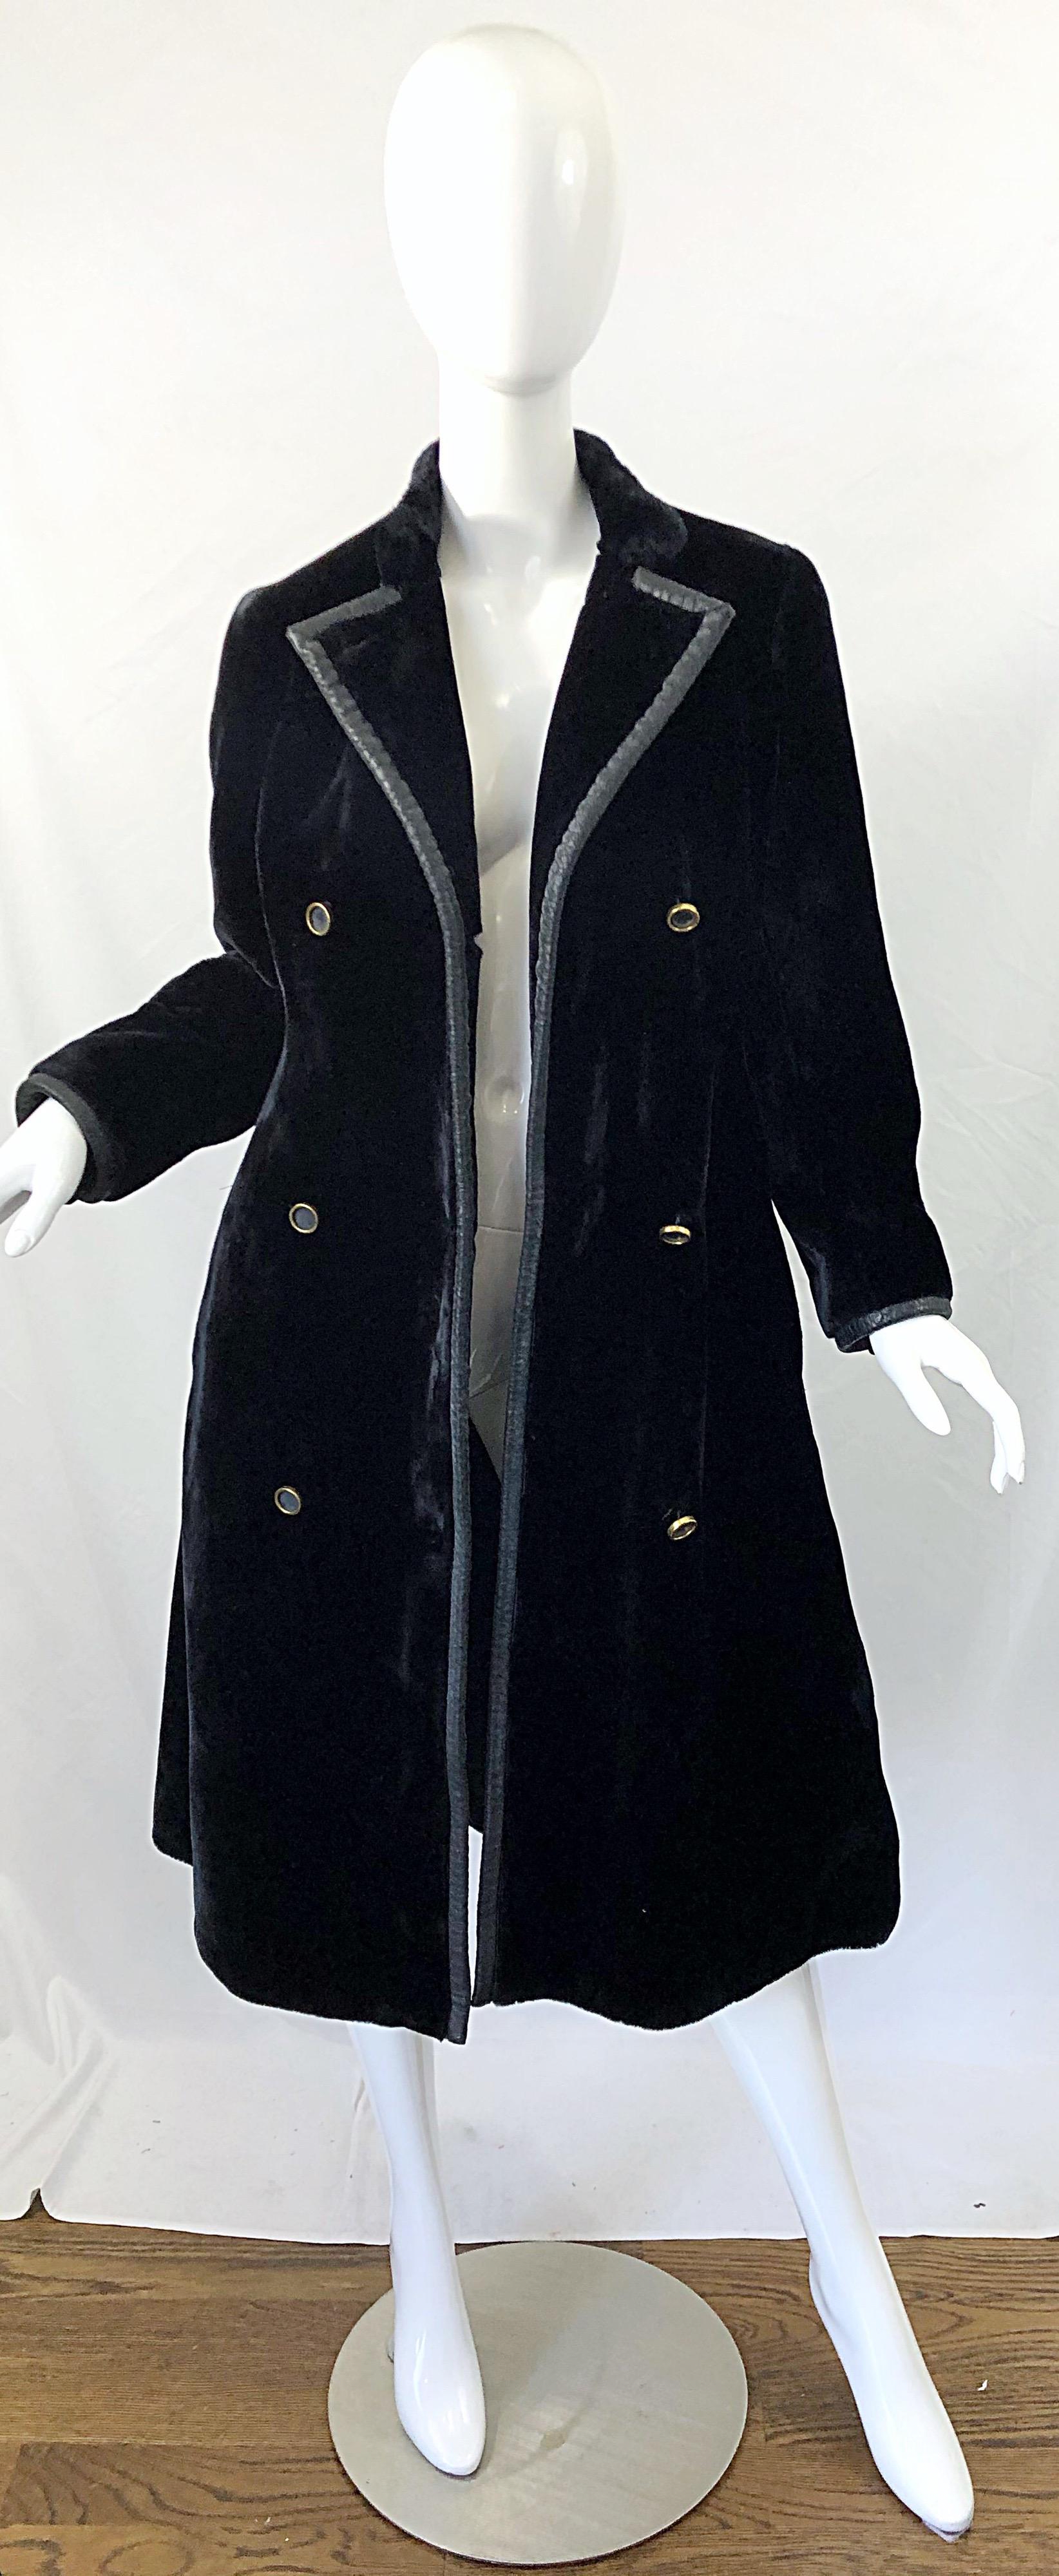 Givenchy 1960s Faux Fur Black Double Breasted Vintage 60s Swing Jacket Coat 5